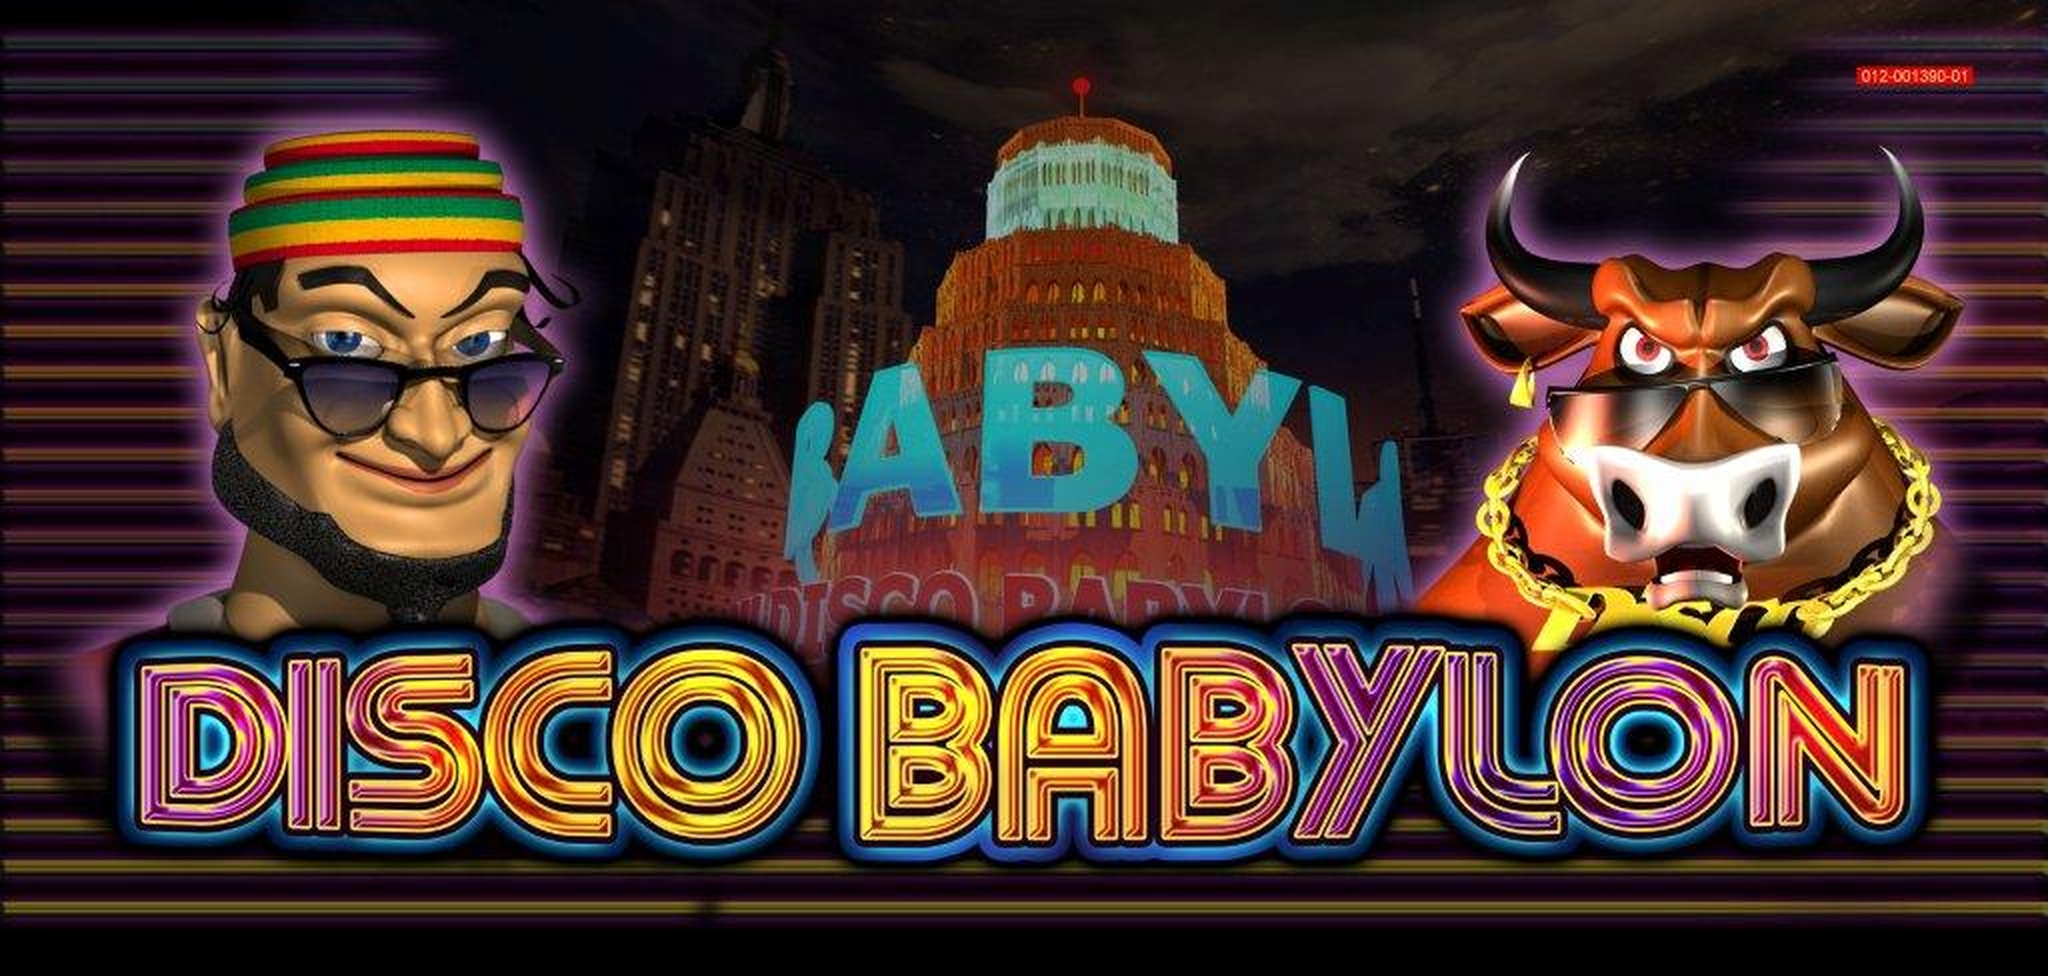 The Disco Babylon Online Slot Demo Game by casino technology